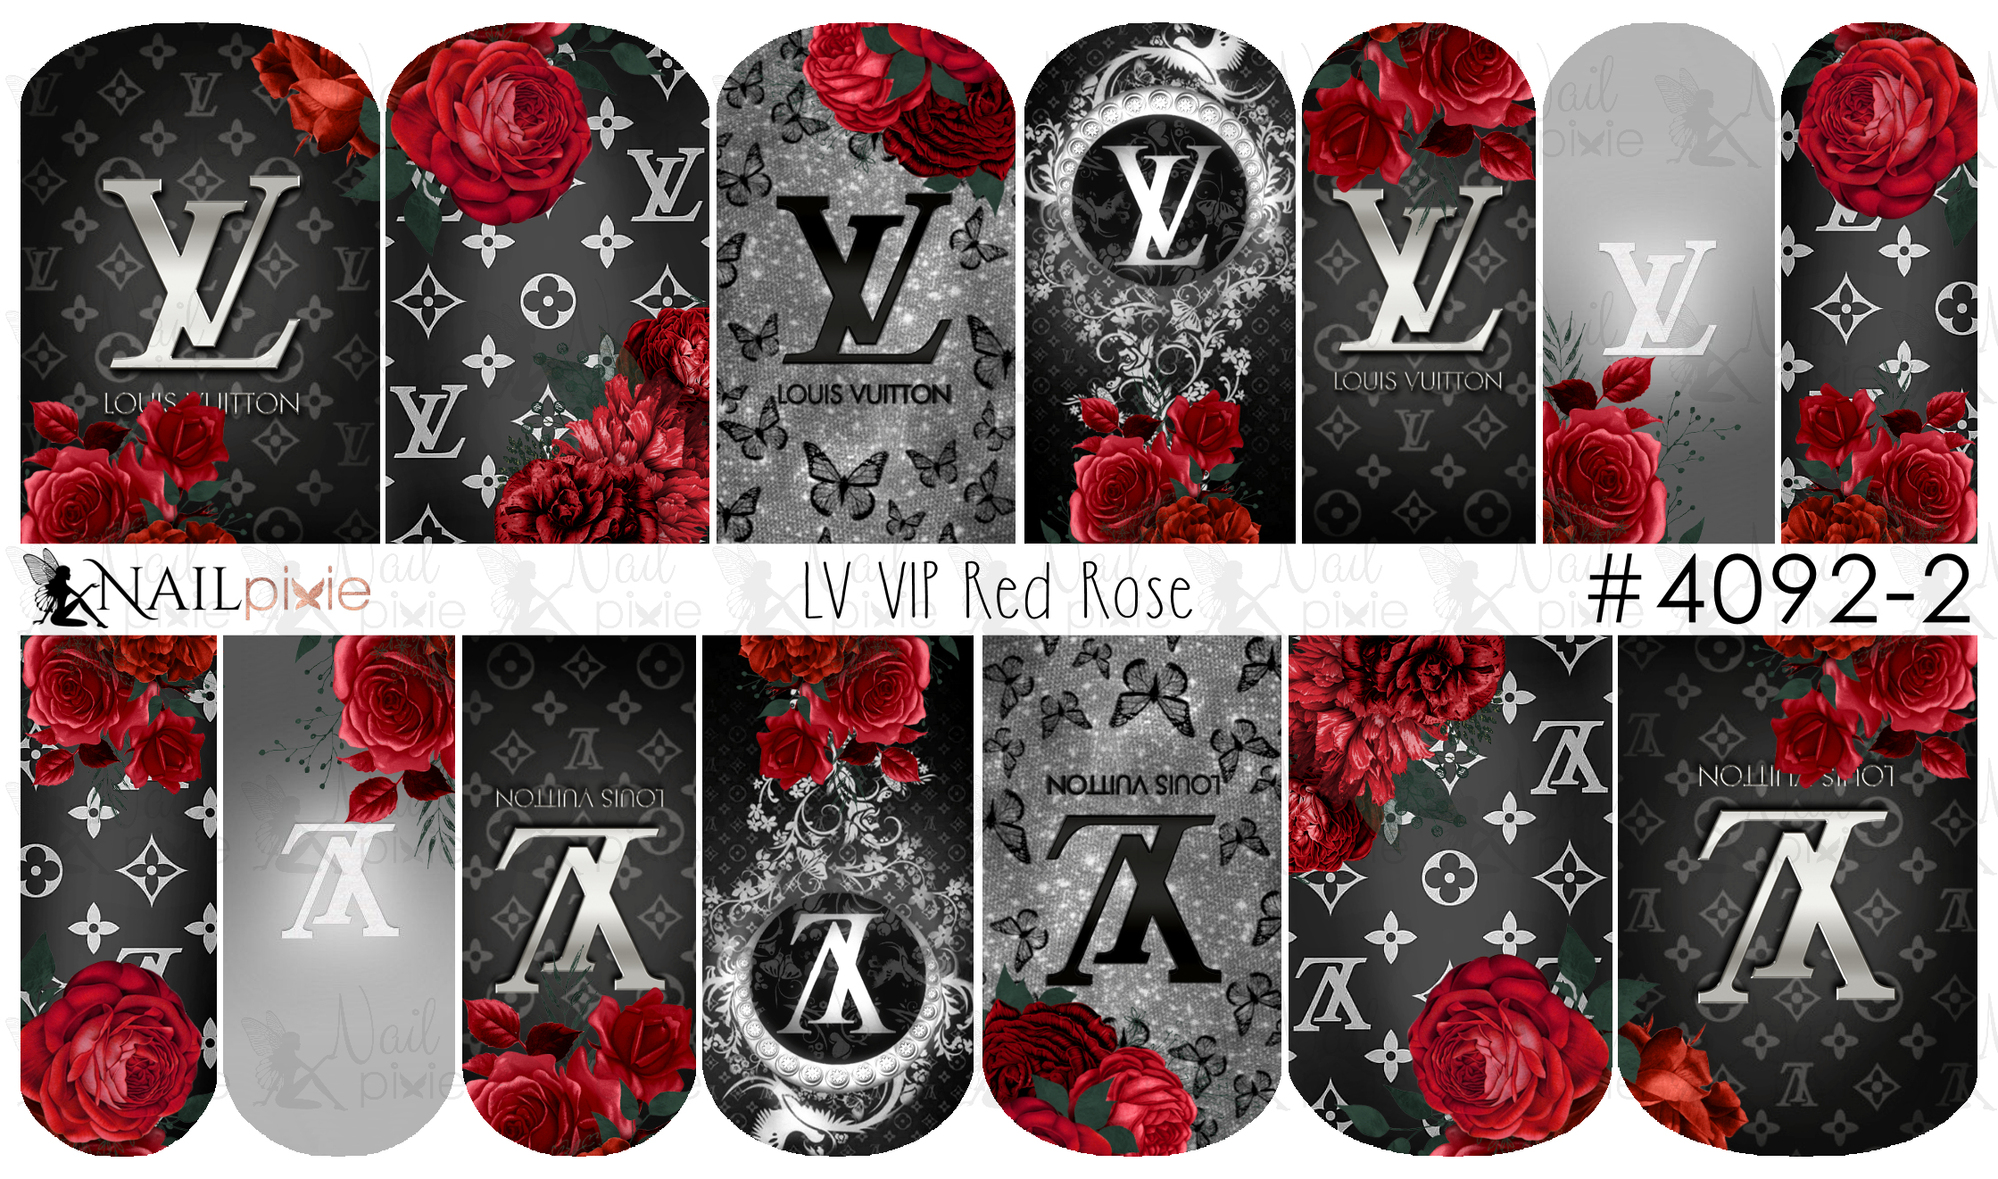 Skate Lv Red, Sculpture by Rose